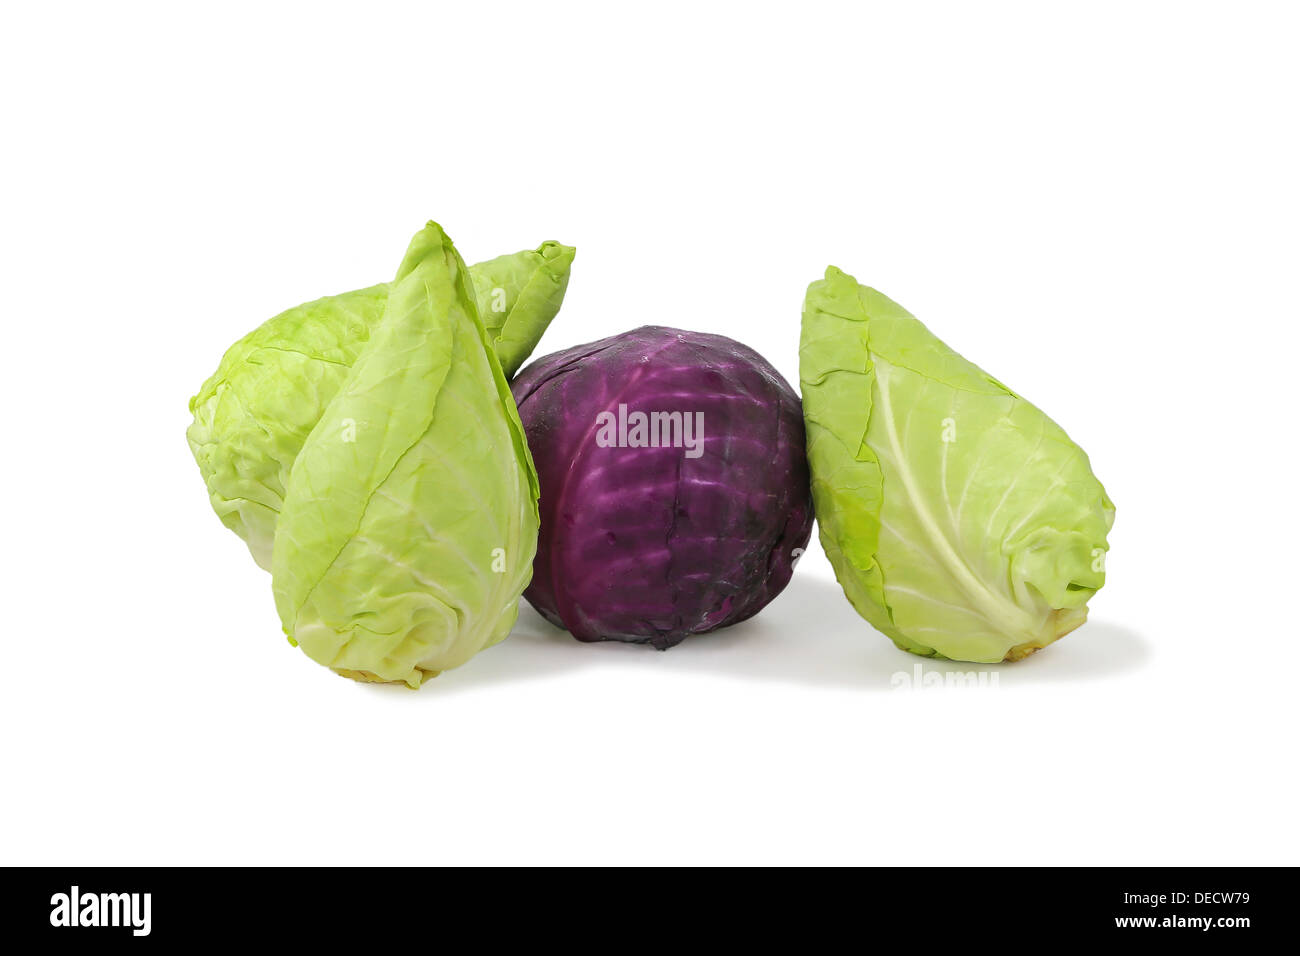 Purple and green cabbages conical shape isolated on a white background Stock Photo